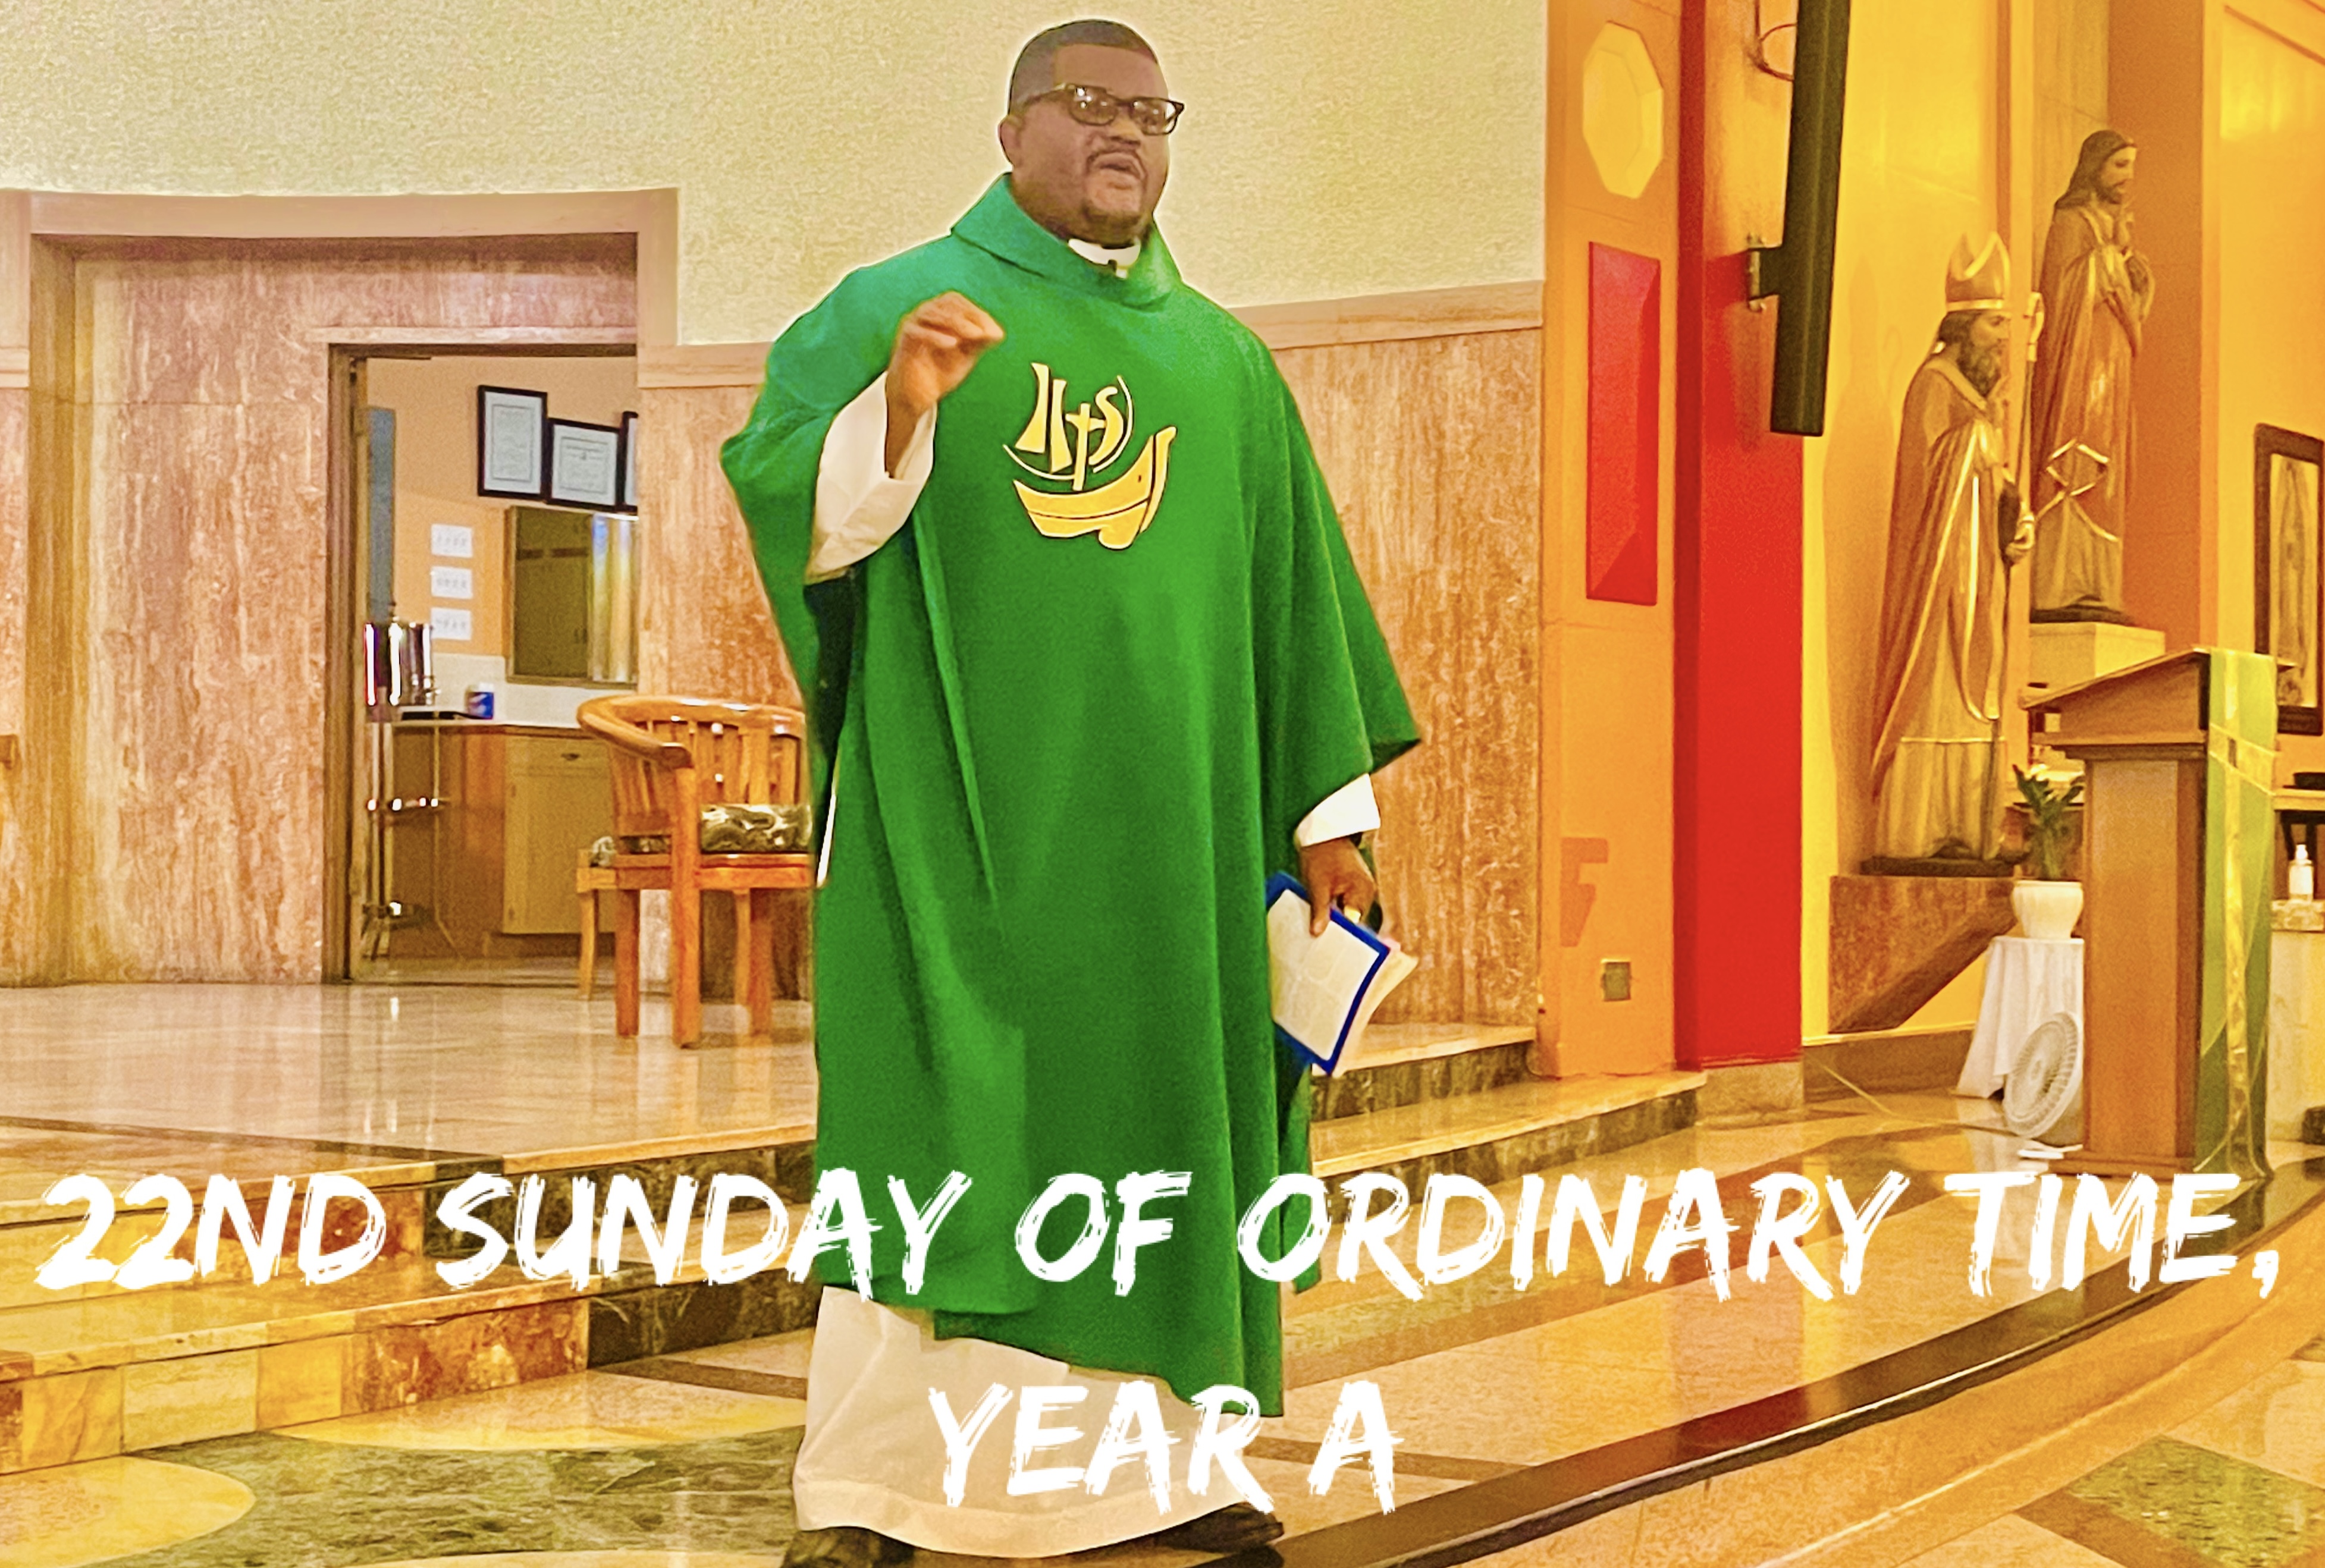 22nd Sunday of Ordinary Time, Year A